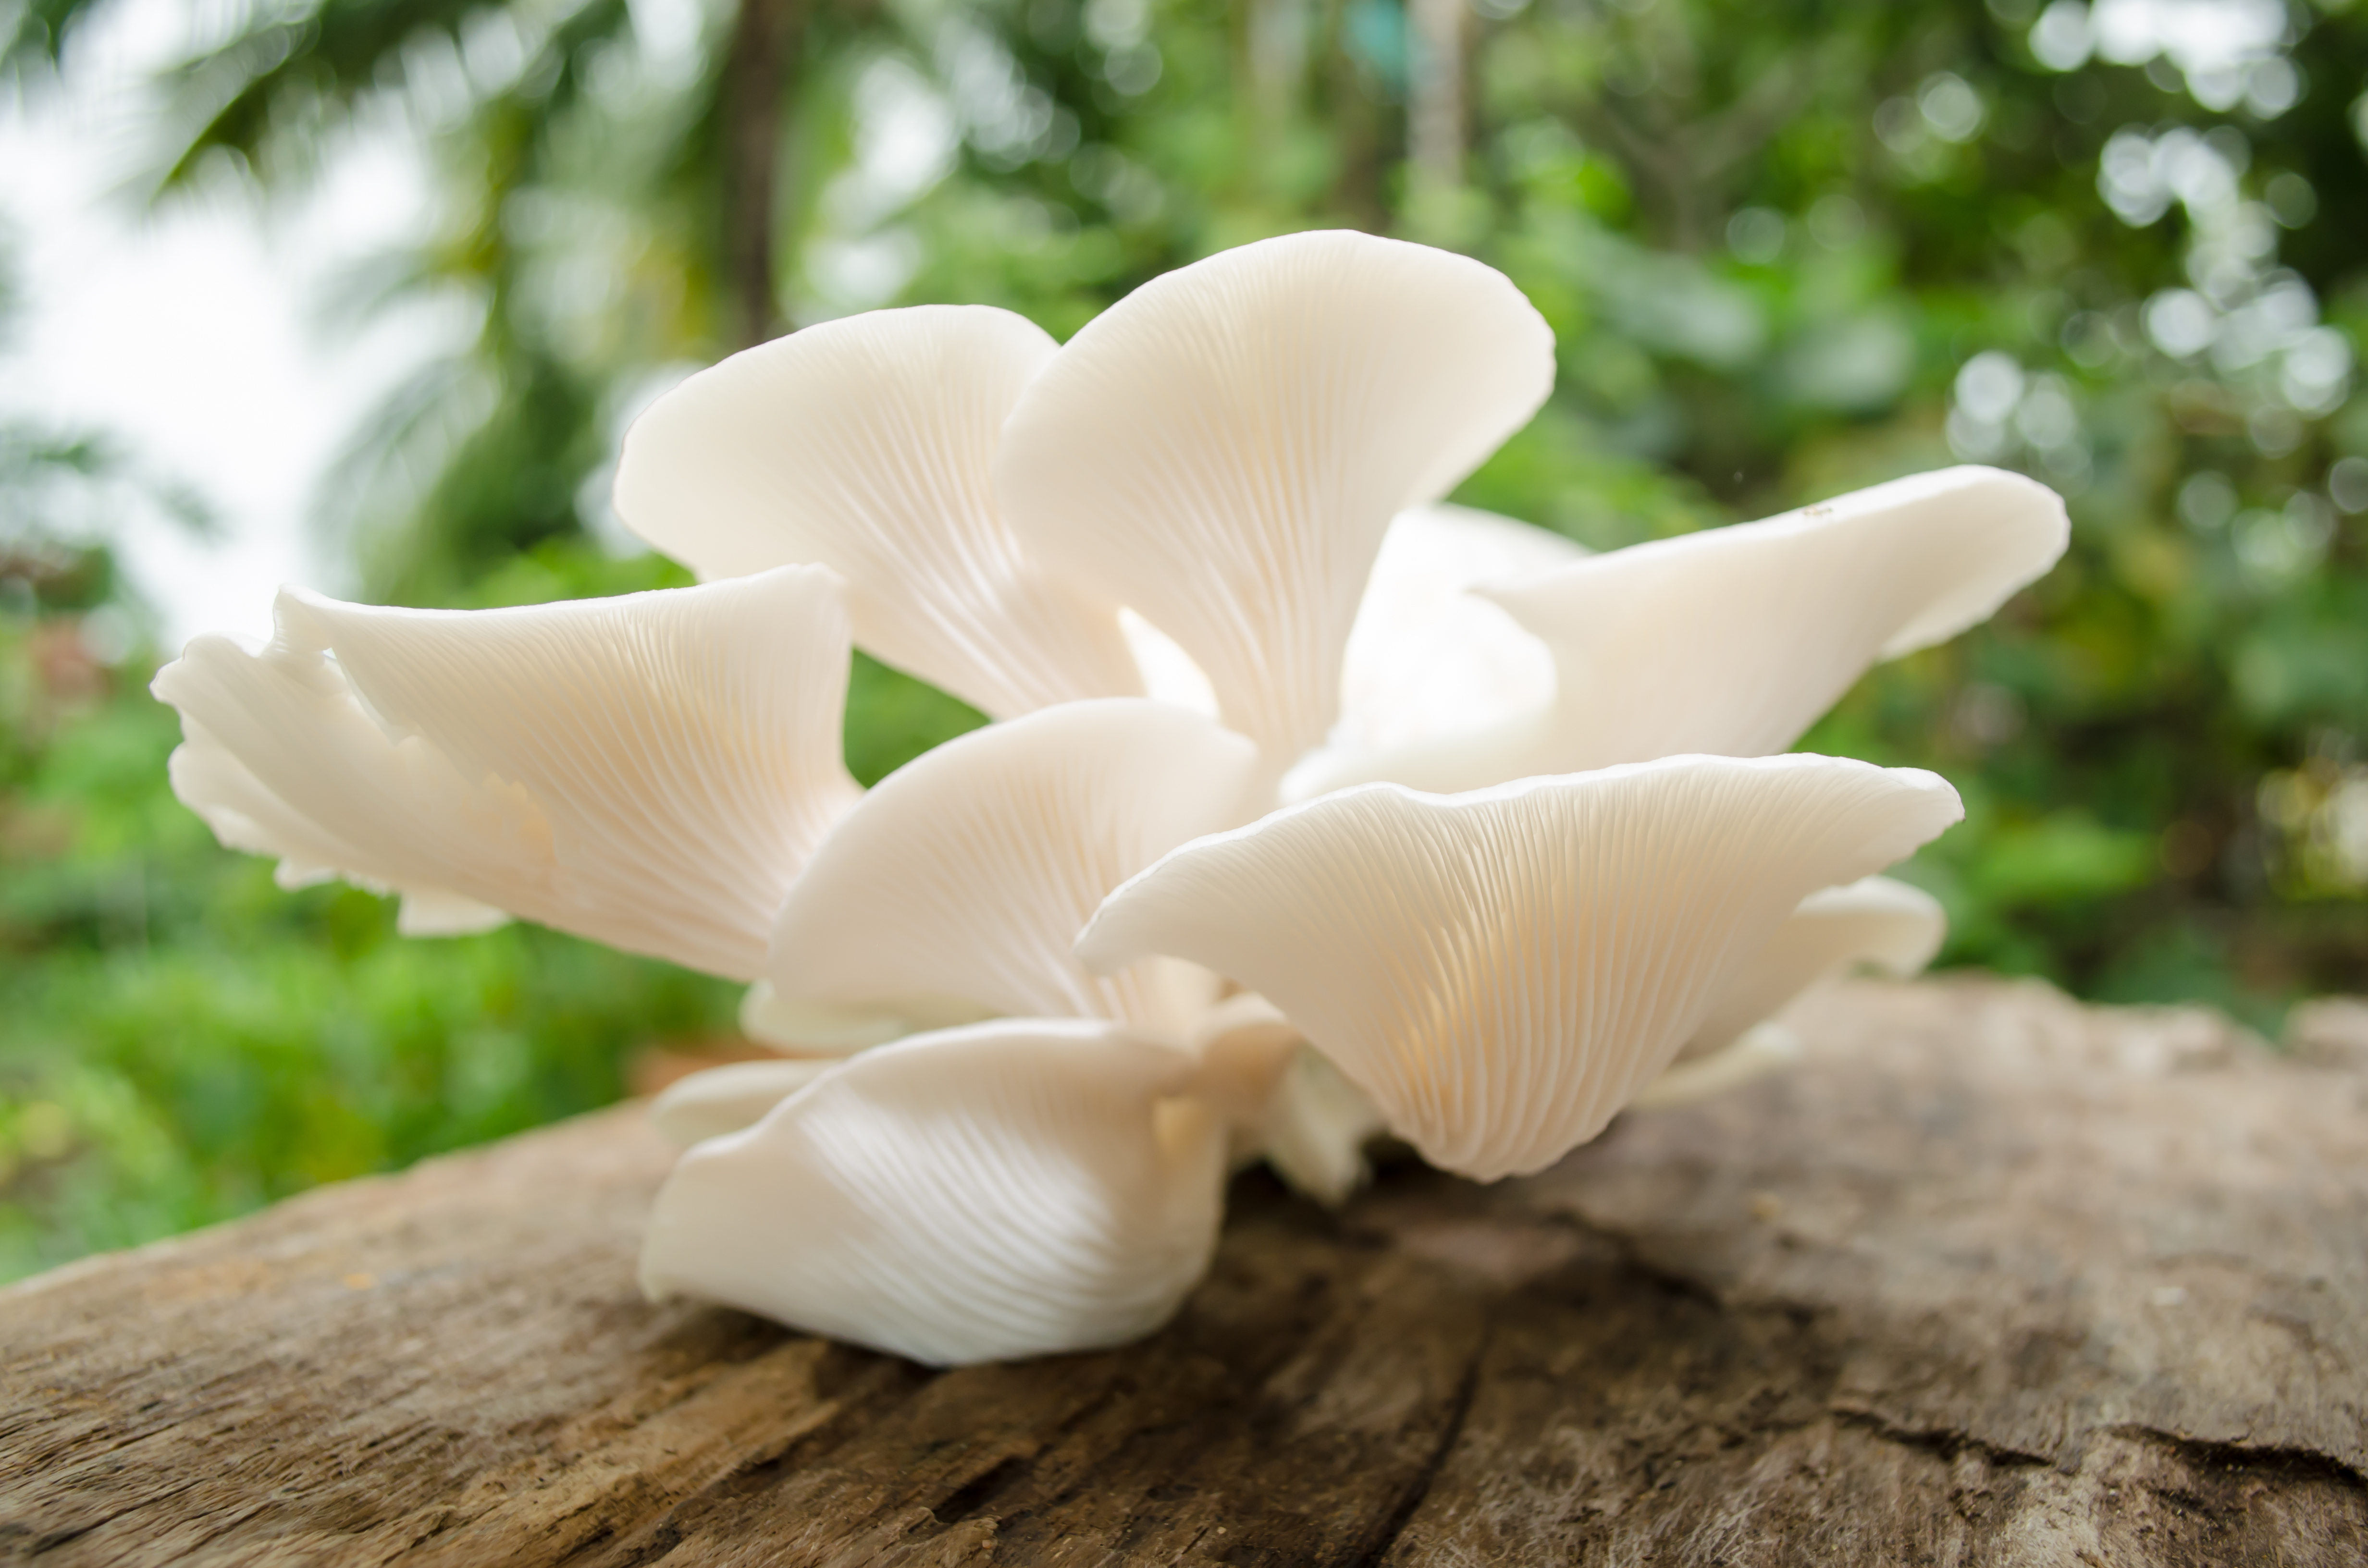 Fungi Are Capturing More Carbon Than We Thought